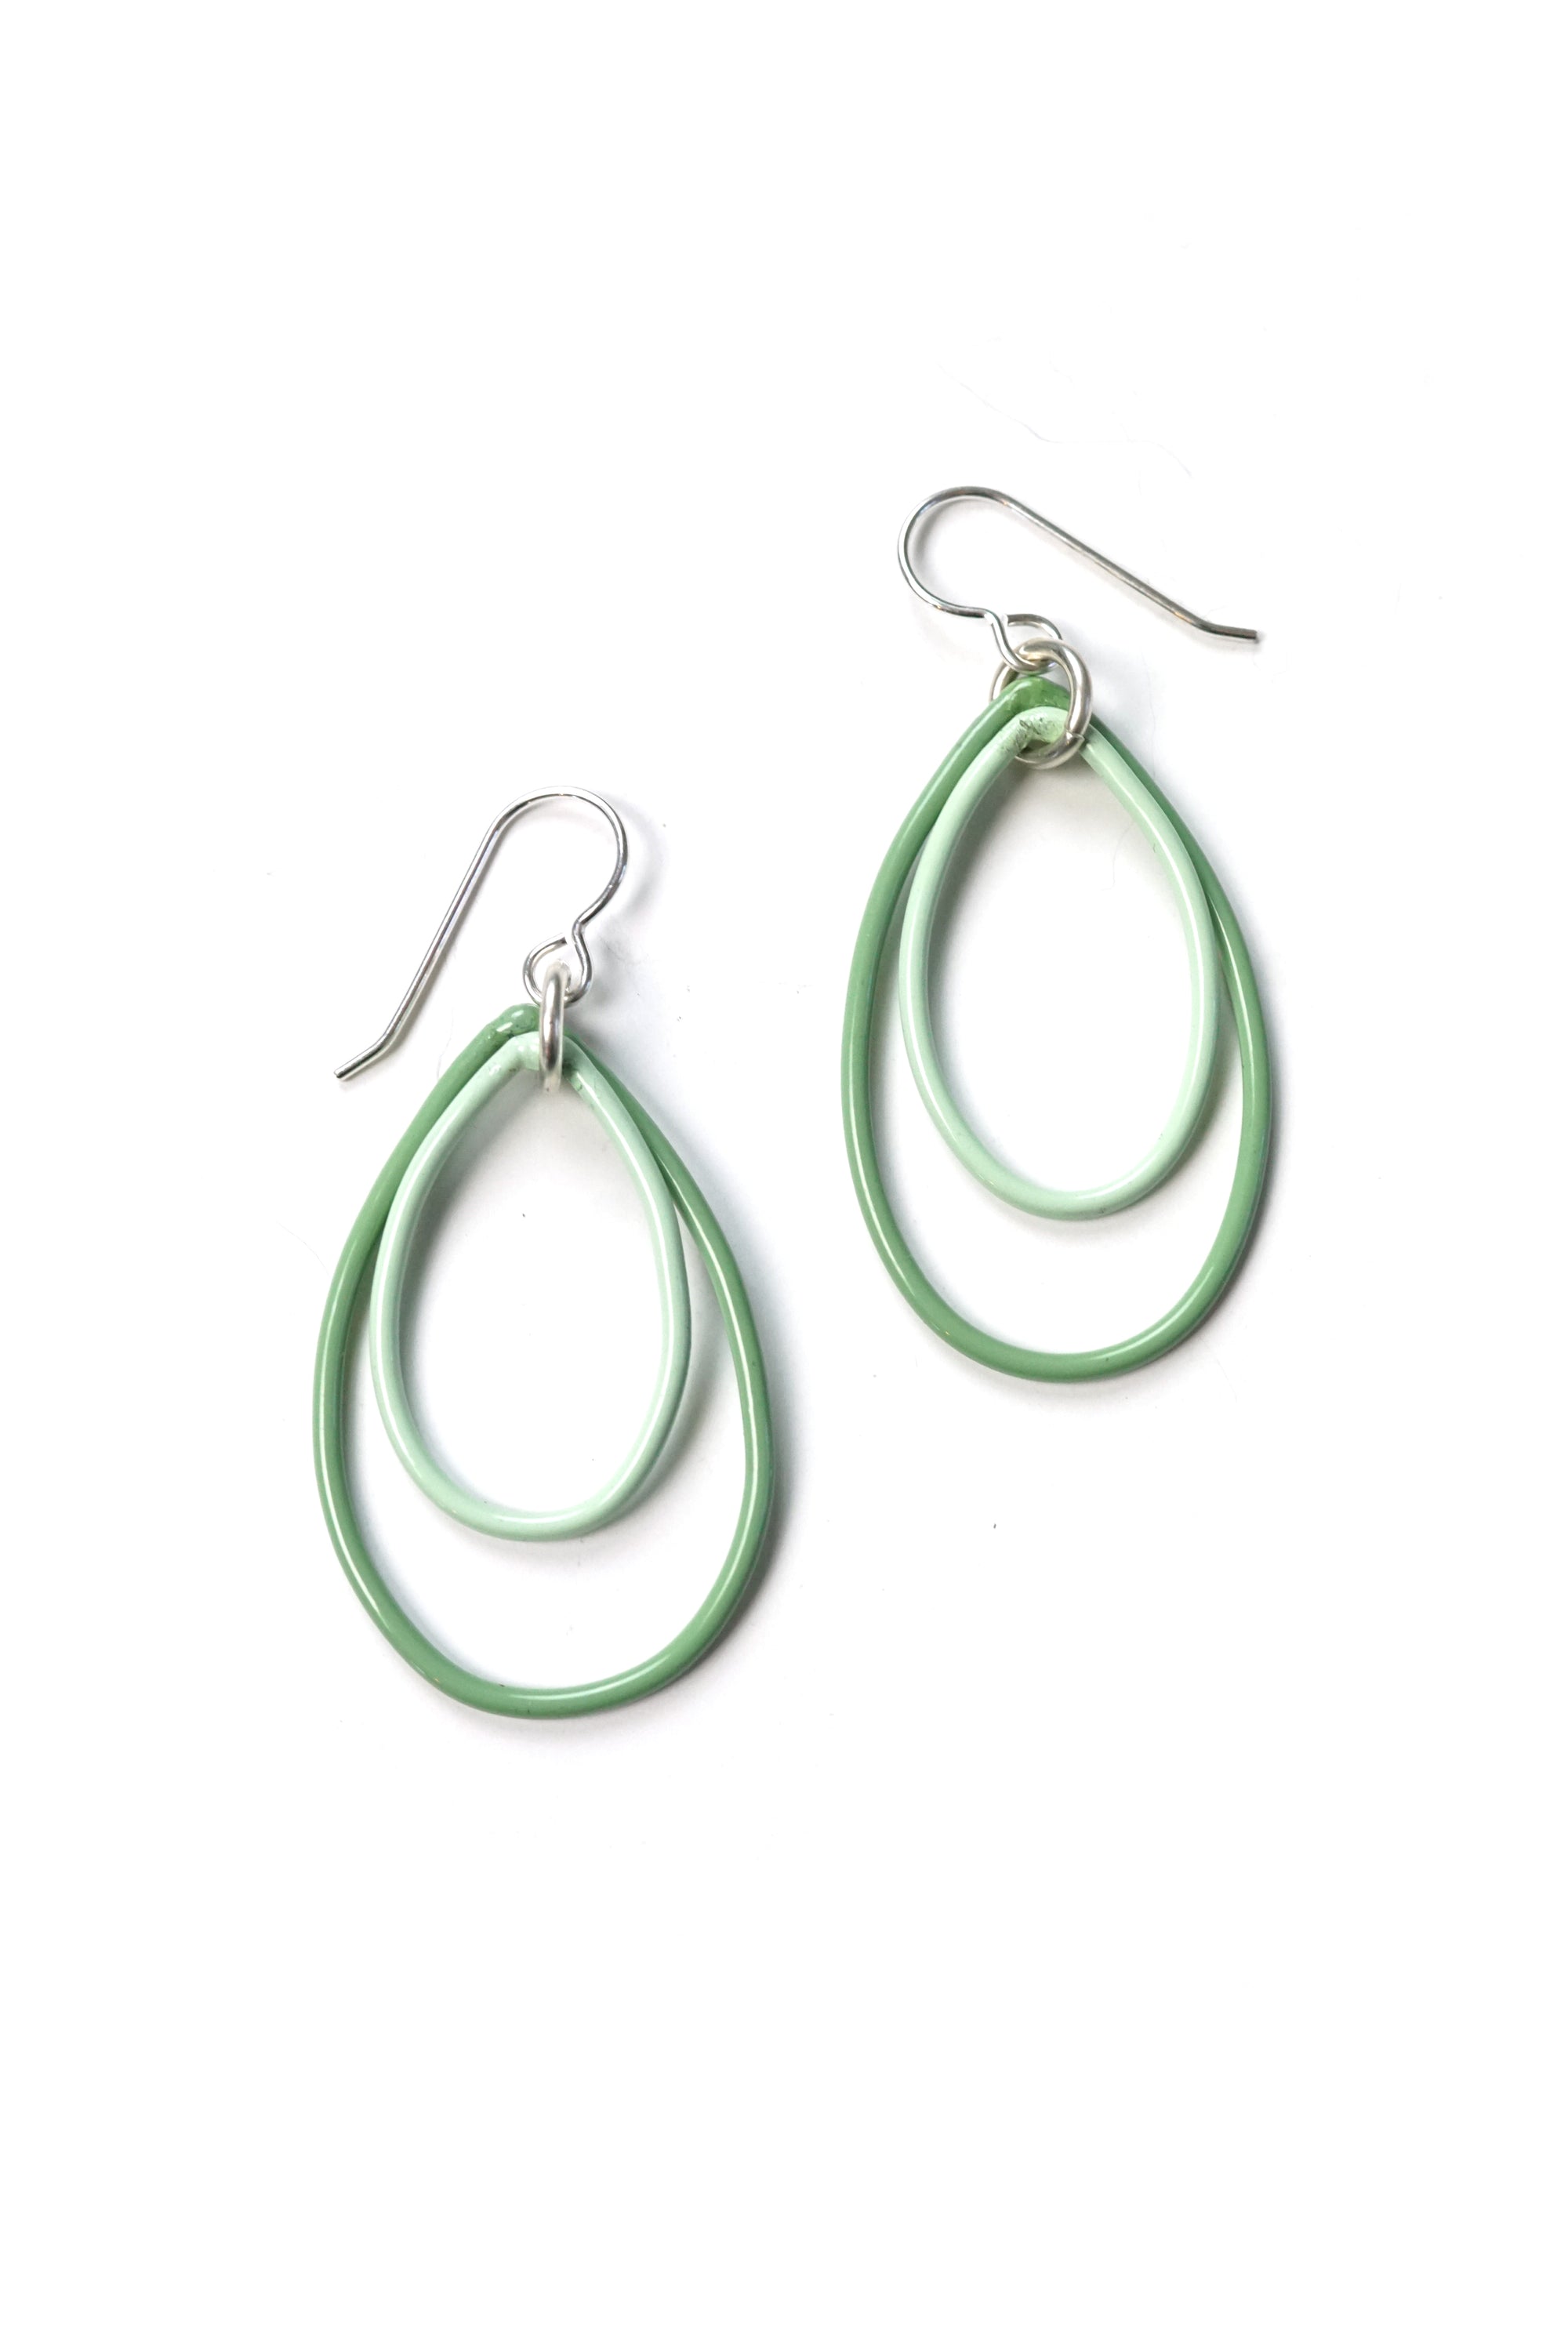 Nellie earrings in Pale Green and Soft Mint